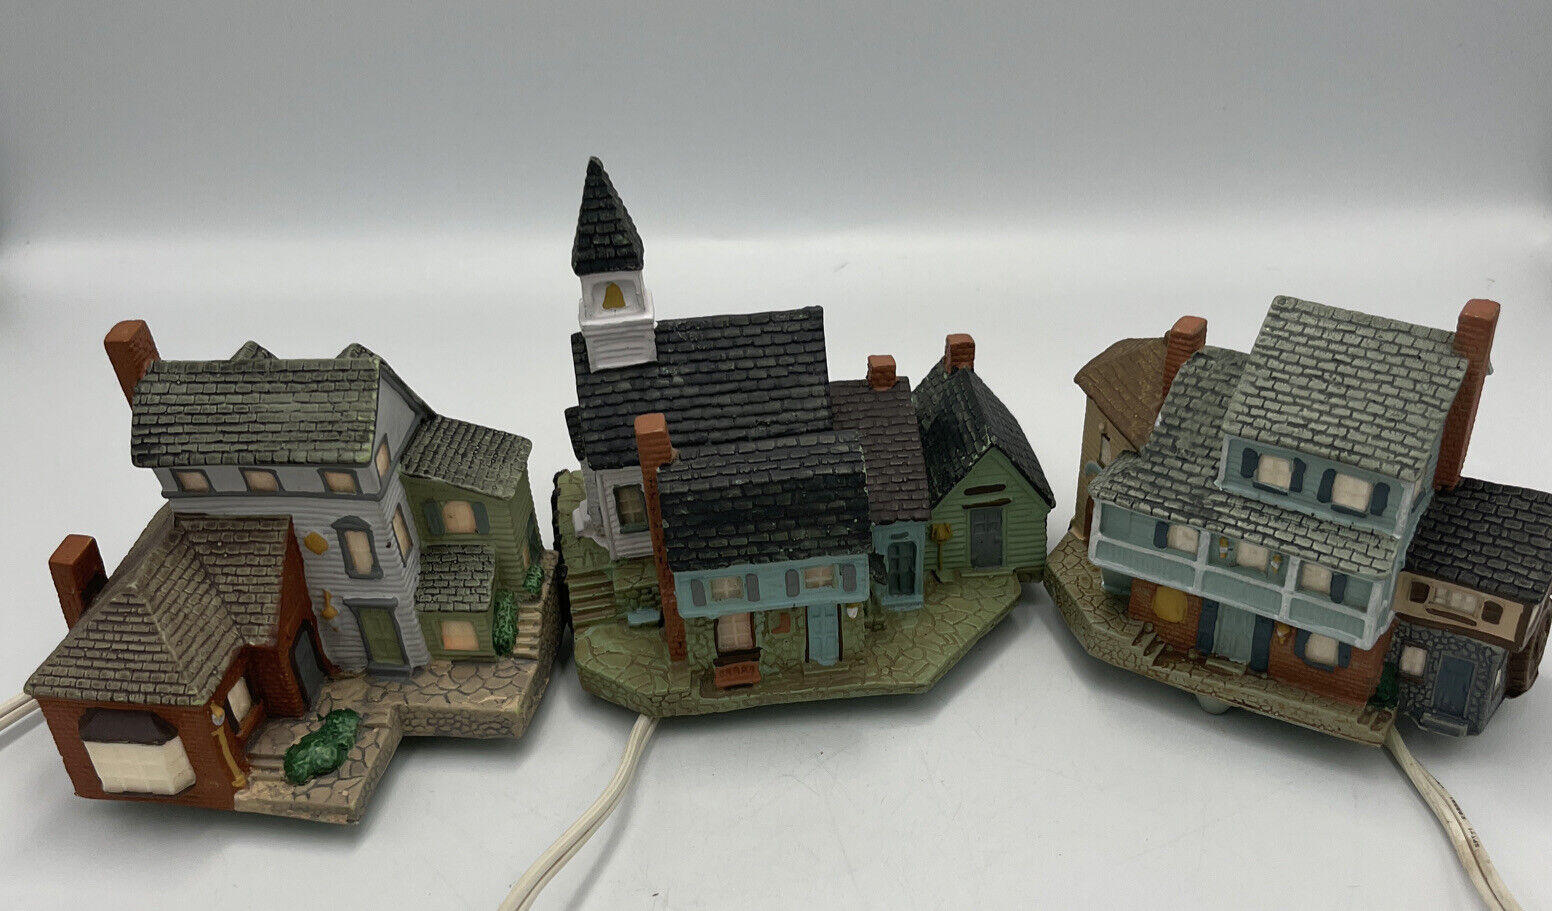 (3) Avon 1989 Early American Light-Up Village Collection 1 Church,2 Houses - EUC